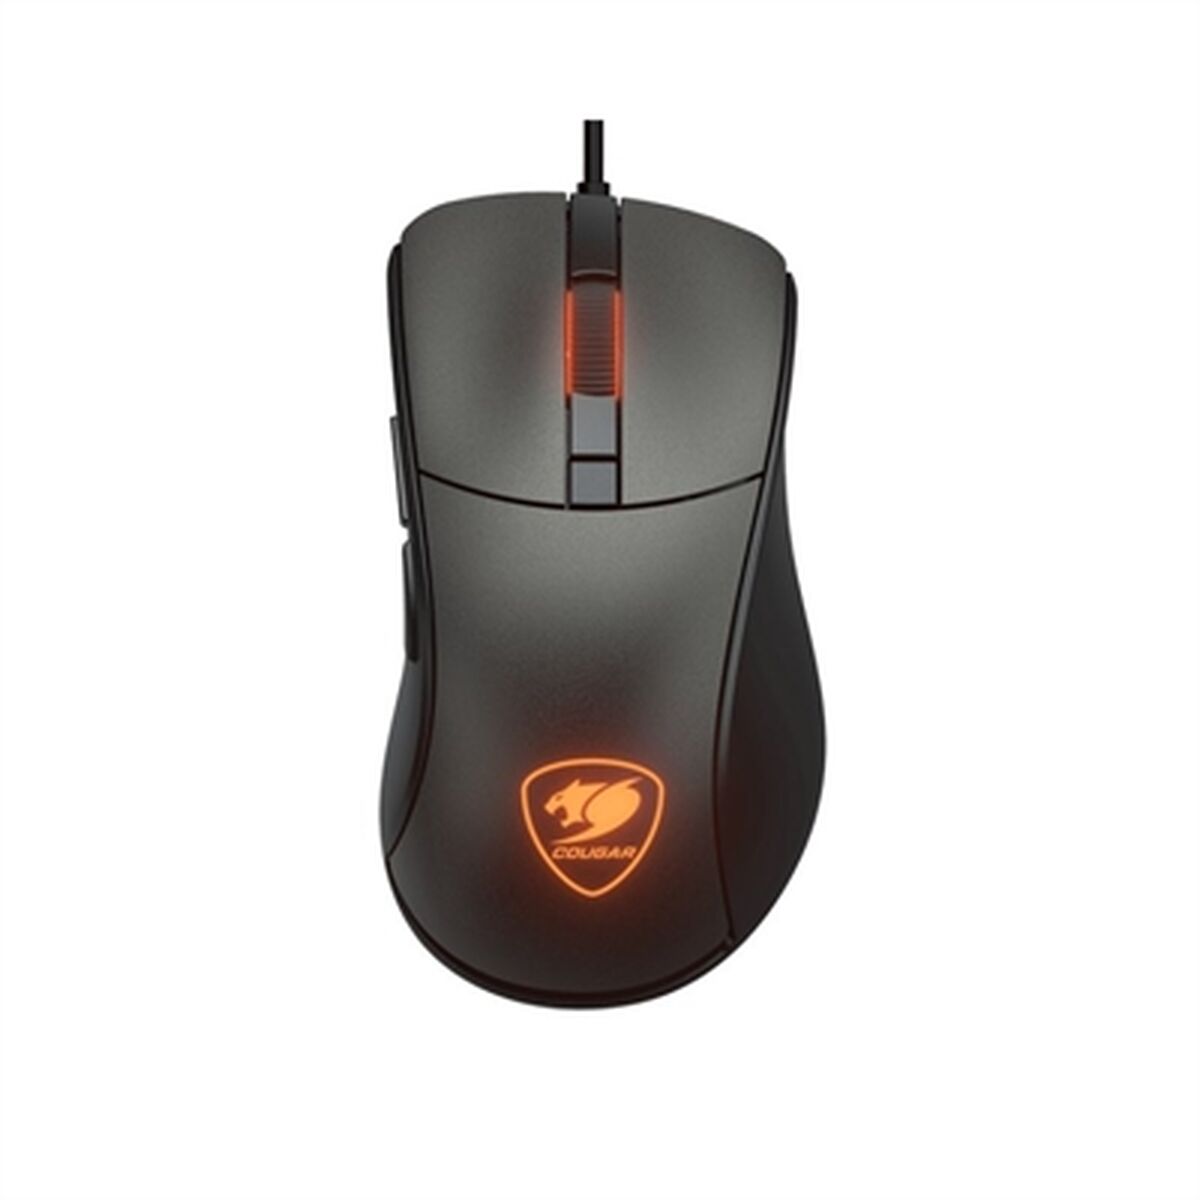 Mouse Cougar 3MSEXWOMB.0001 Black, Cougar, Computing, Accessories, mouse-cougar-3msexwomb-0001-black, Brand_Cougar, category-reference-2609, category-reference-2642, category-reference-2656, category-reference-t-19685, category-reference-t-19908, category-reference-t-21353, computers / peripherals, Condition_NEW, office, Price_50 - 100, Teleworking, RiotNook